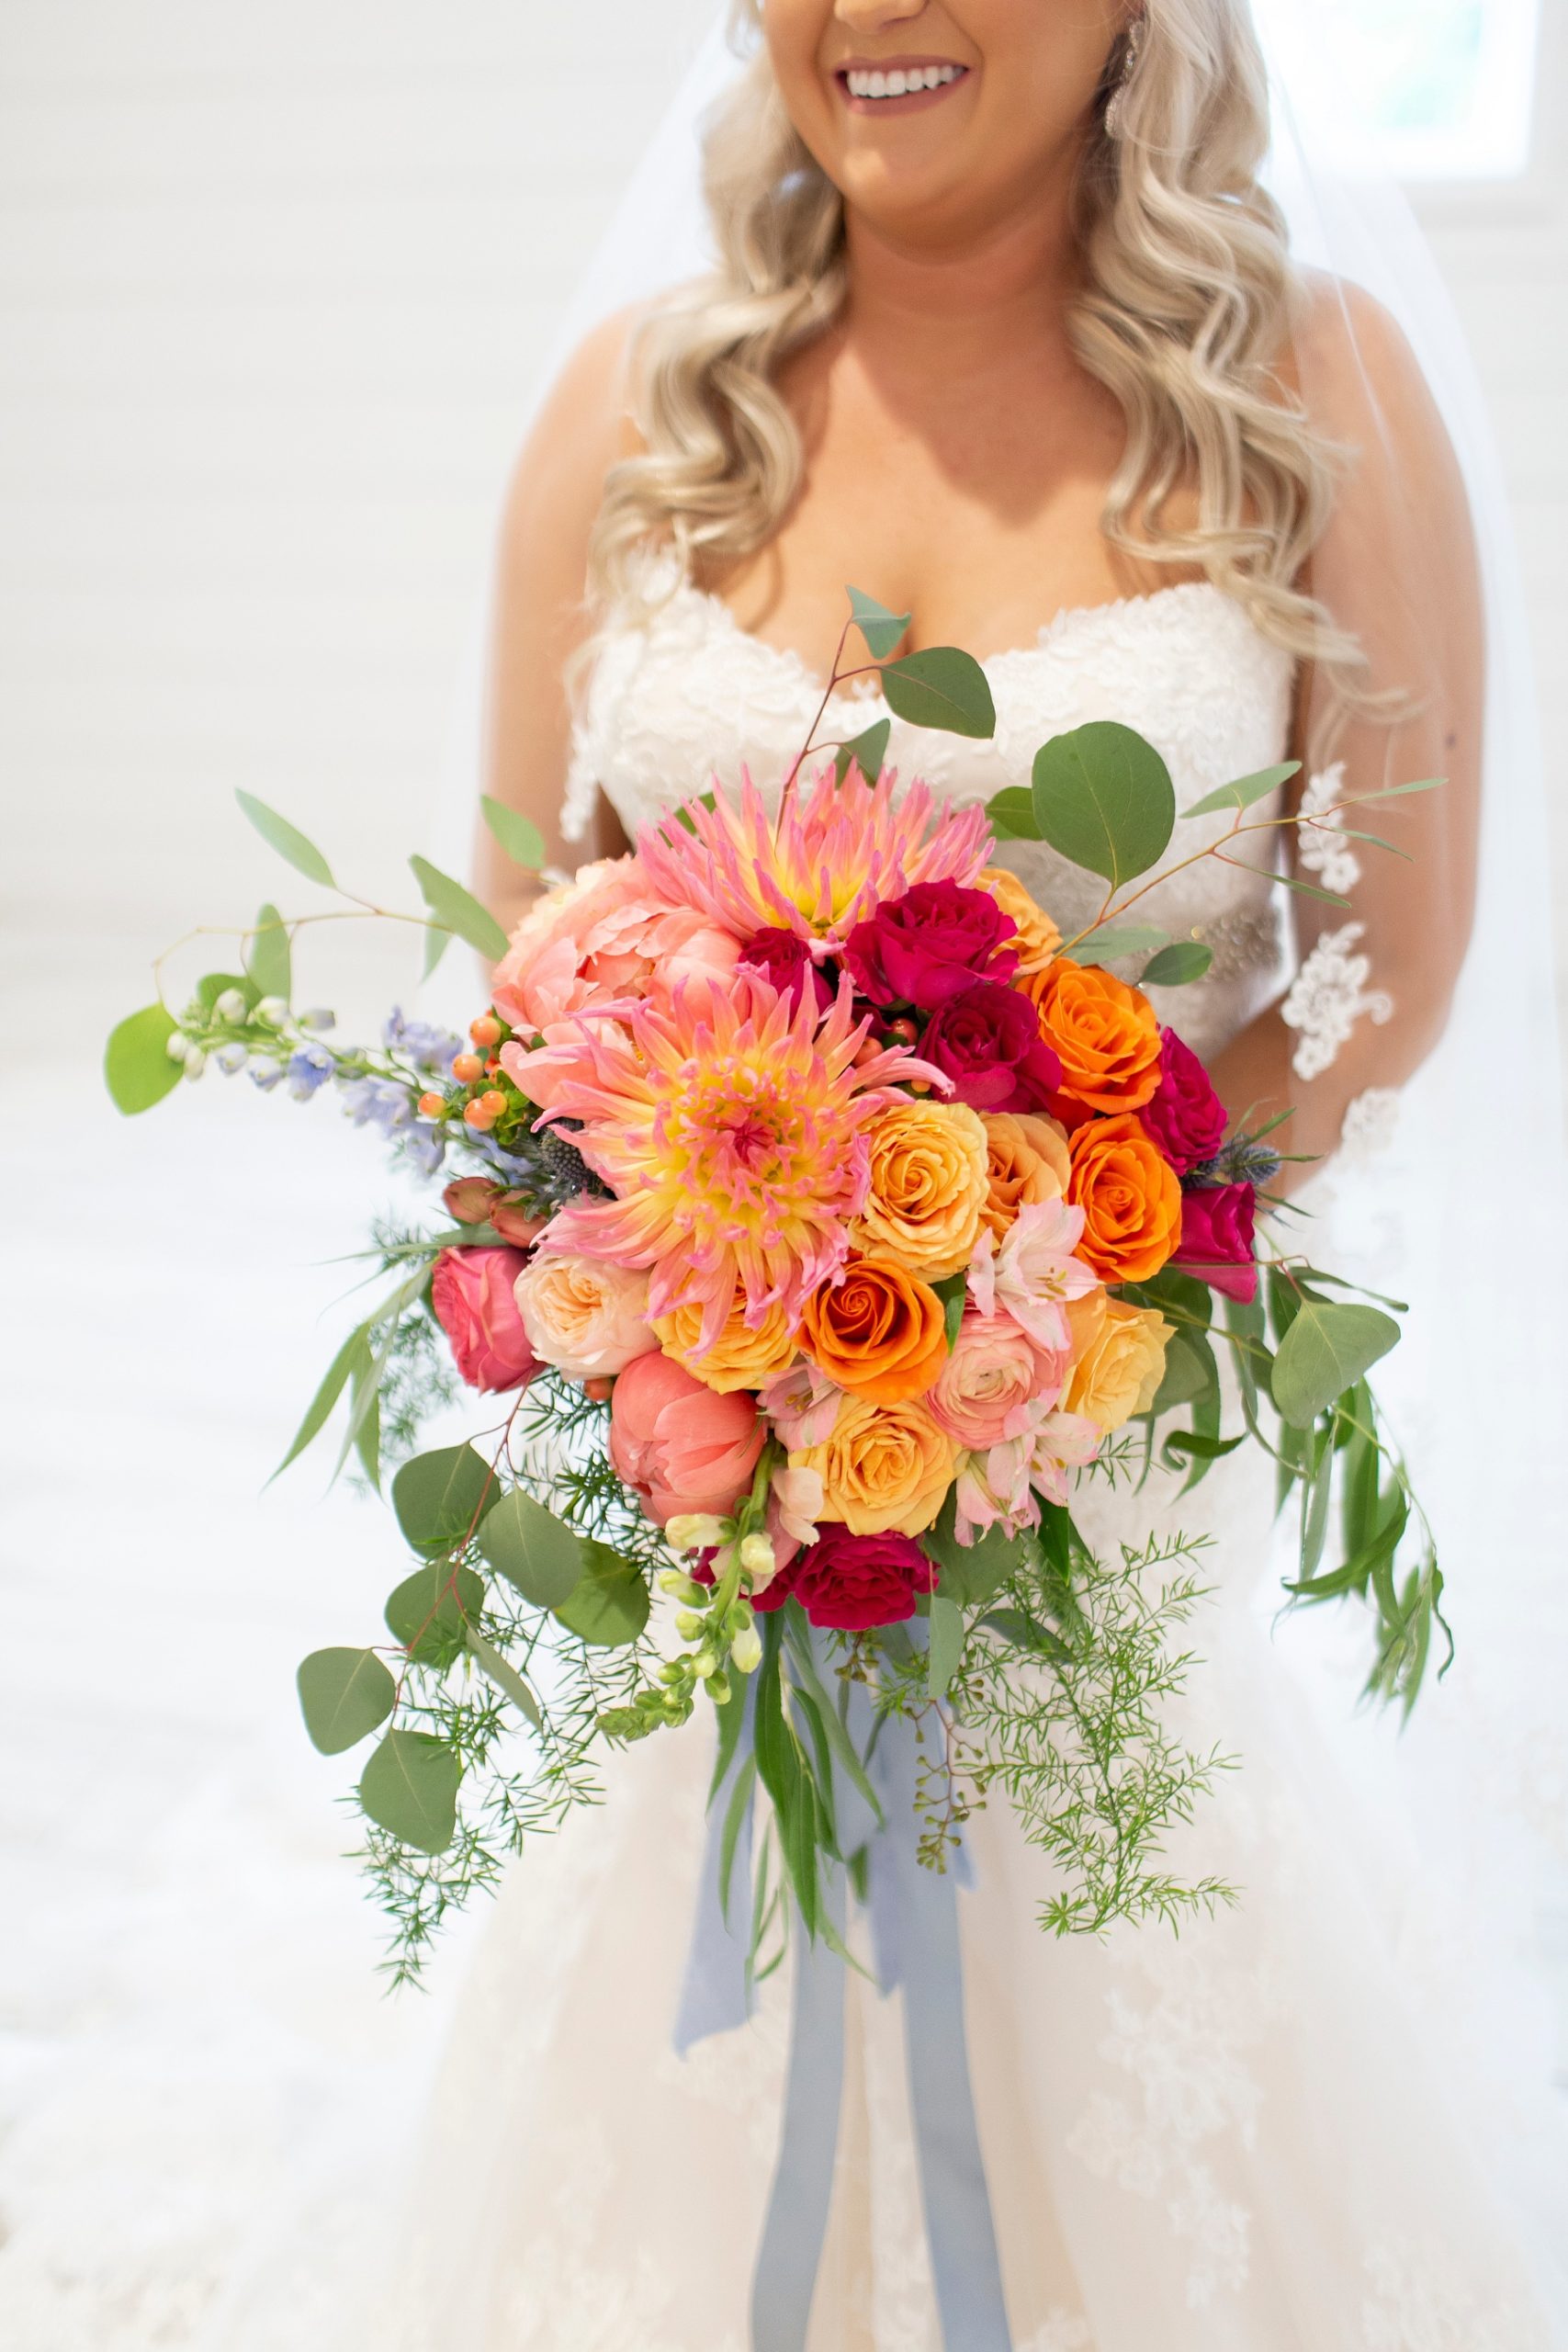 bride with bright wedding bouquet photographed by Randi Michelle Weddings